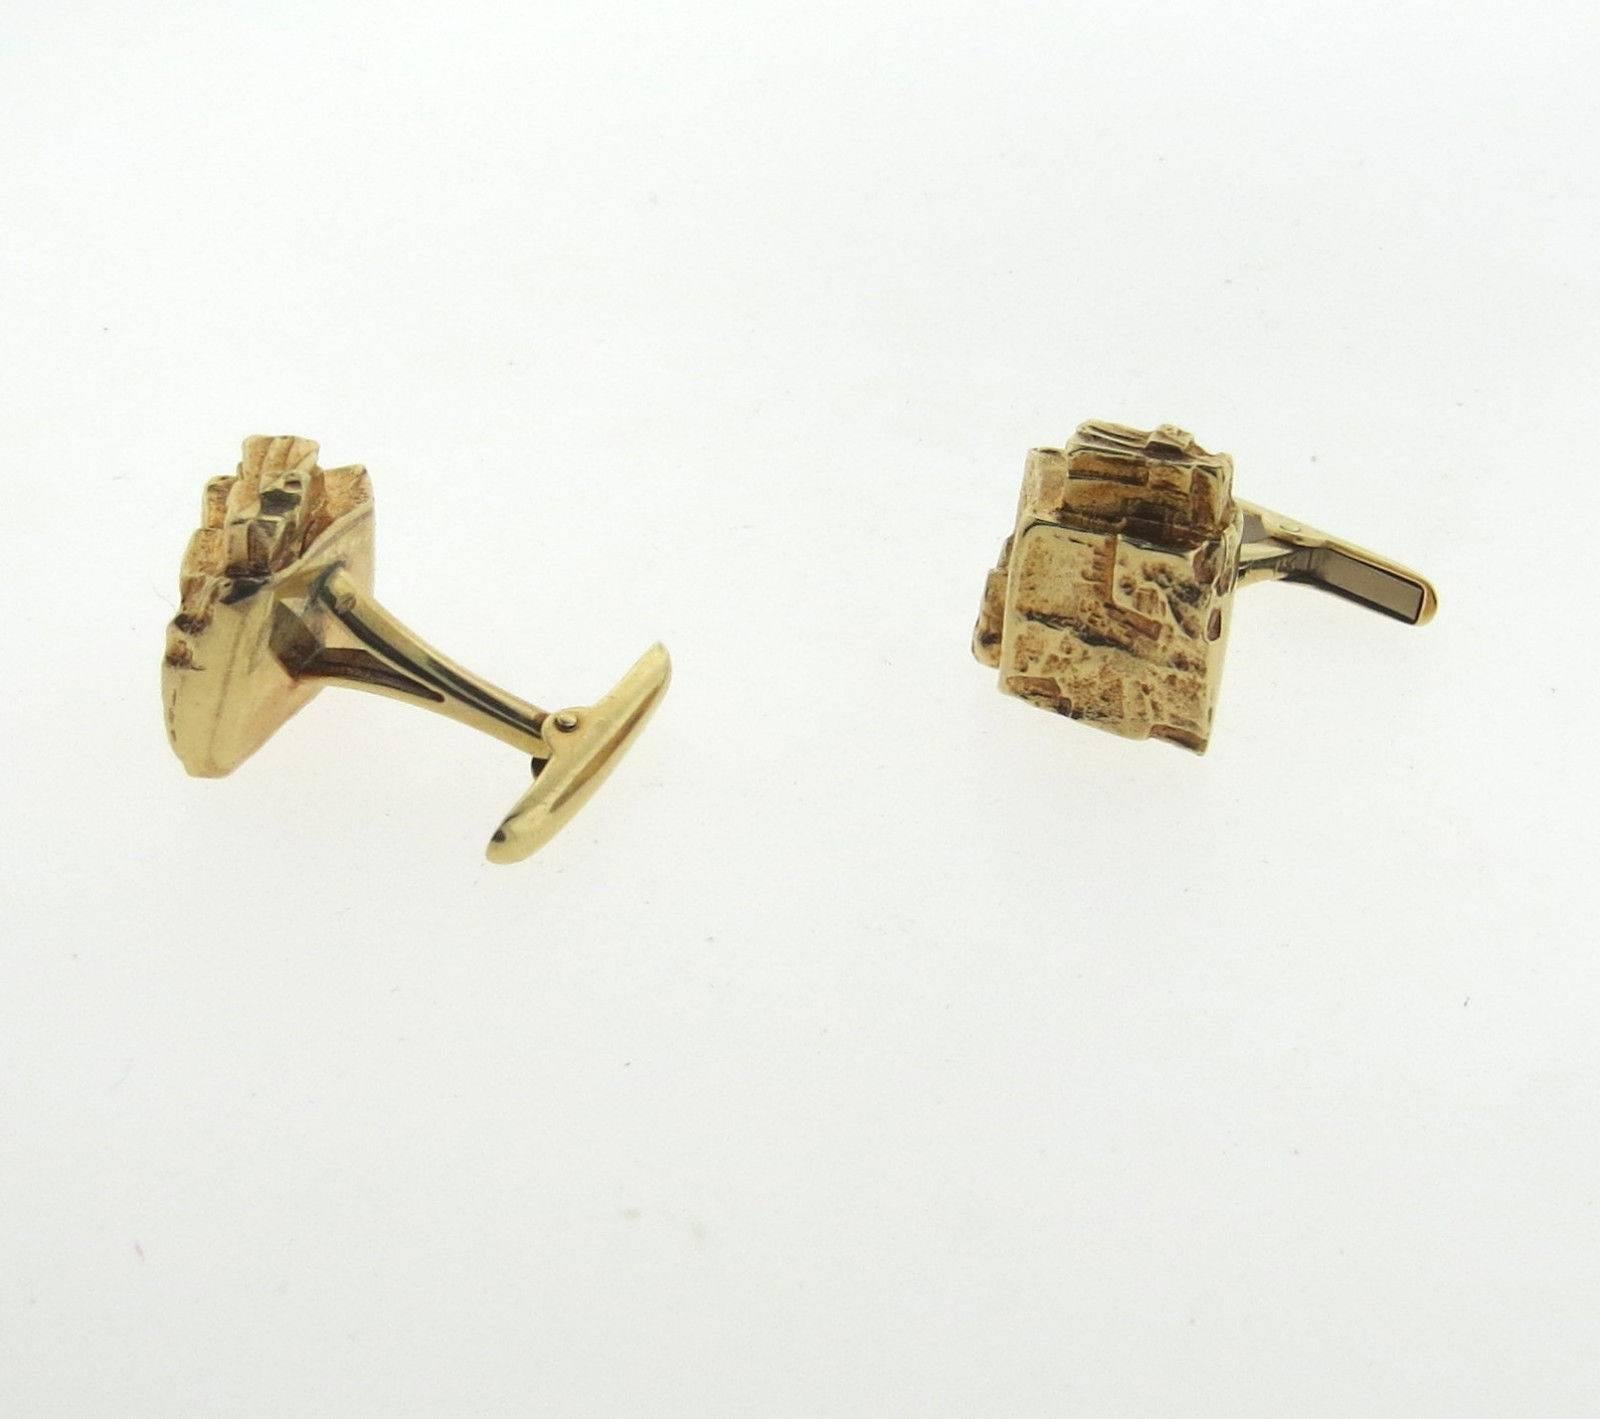 A pair of 14k yellow gold cufflinks.  The cufflinks are 16mm x 18mm and weigh 19.7 grams.